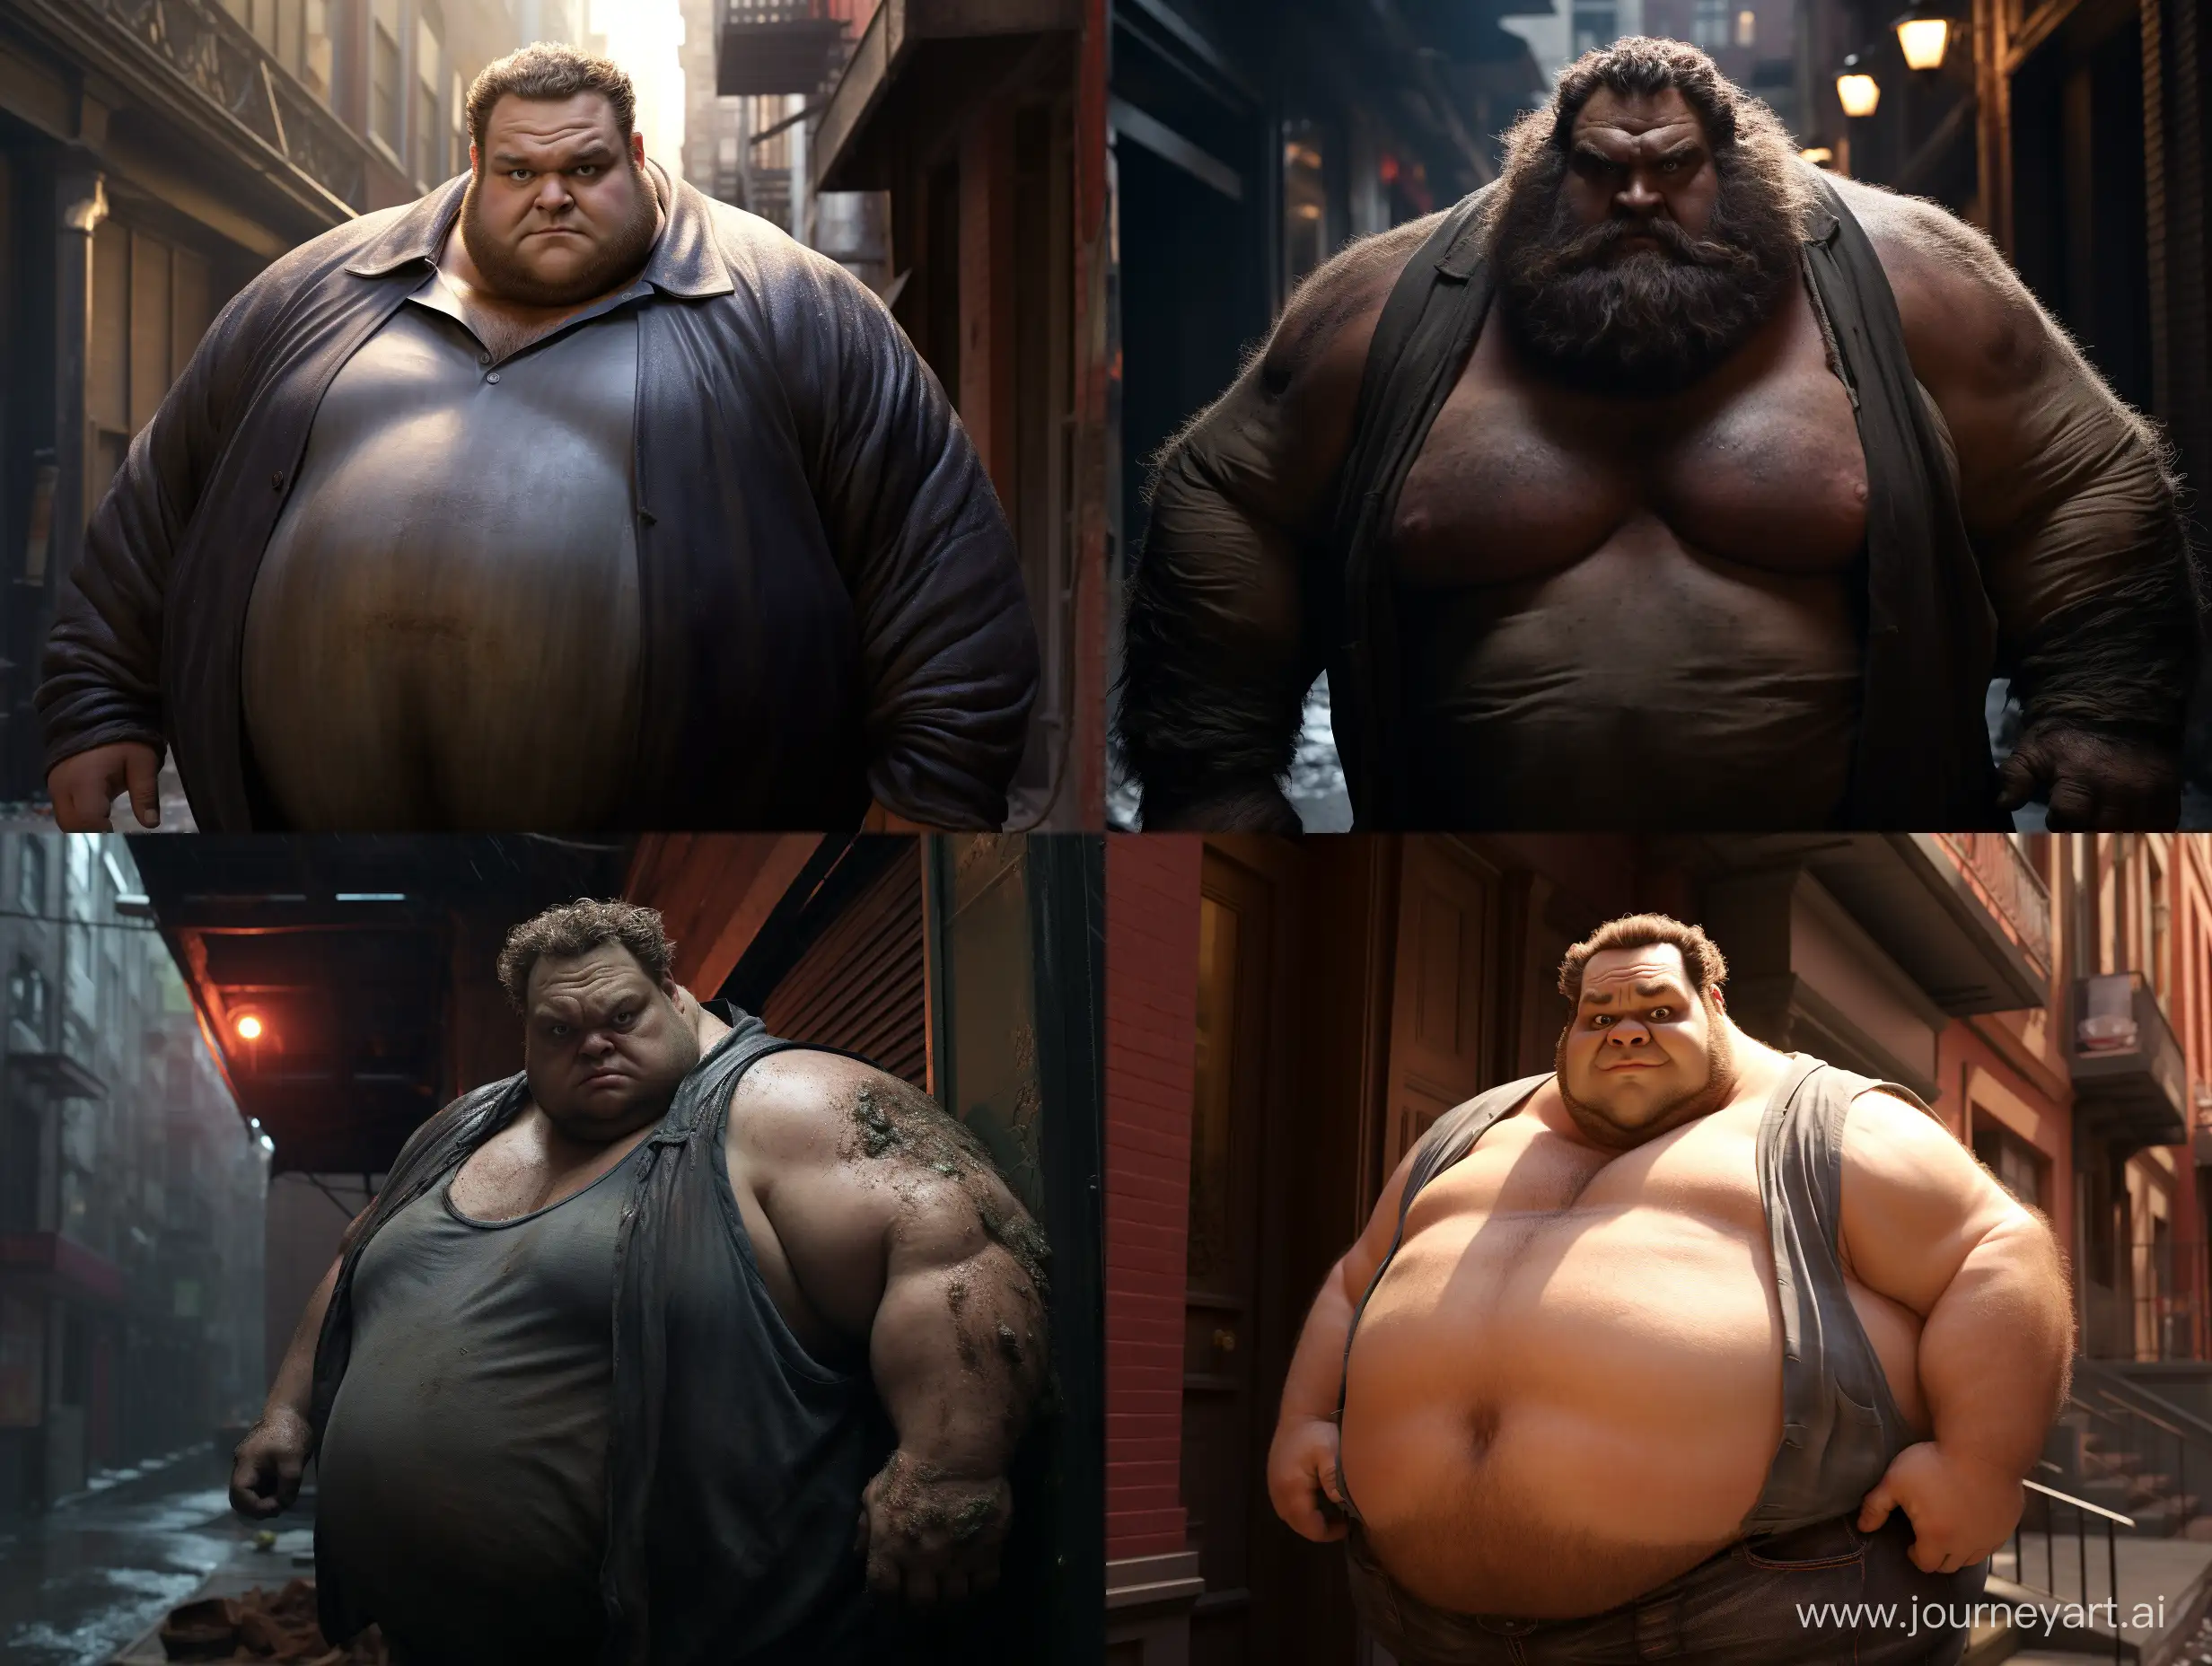 Rotund-Thor-Poses-with-Confidence-in-Cinematic-Alley